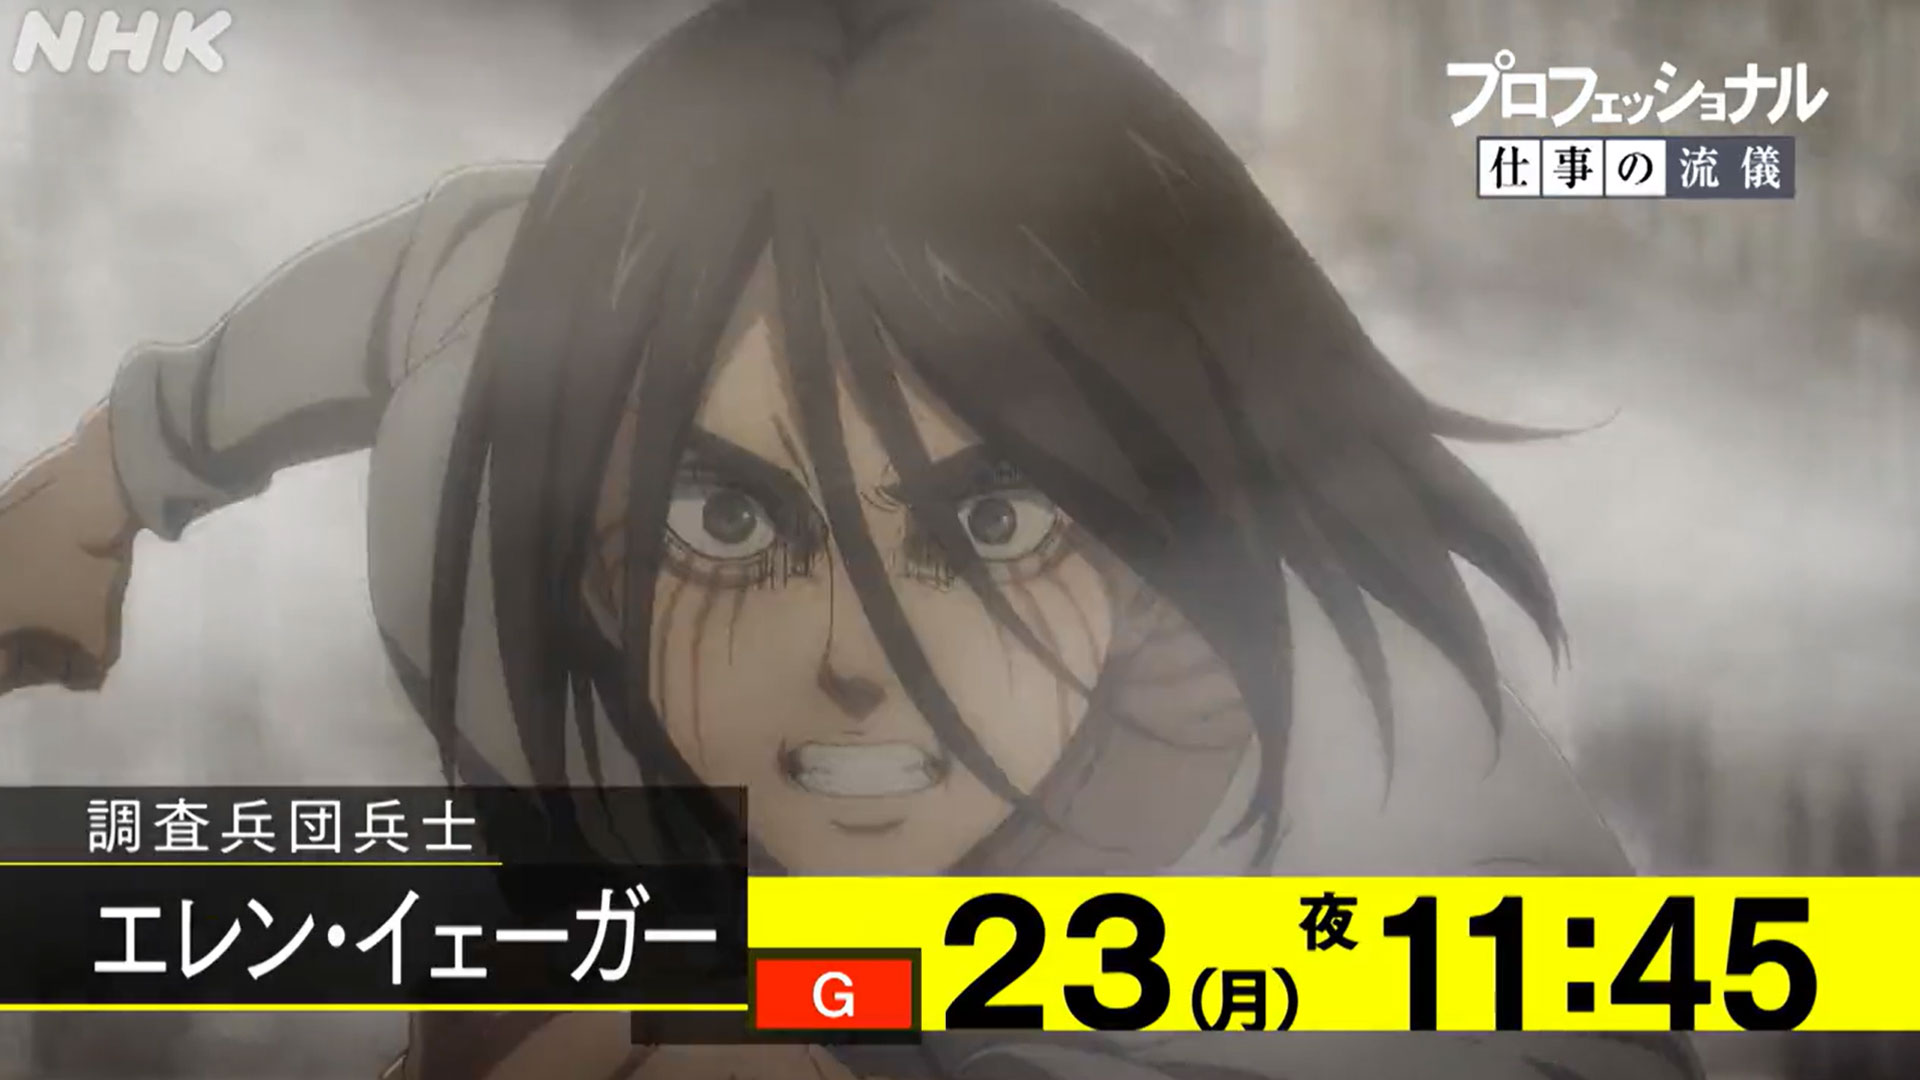 Royal Treatment: Eren Yeager is the First Anime Protagonist to Be Interviewed